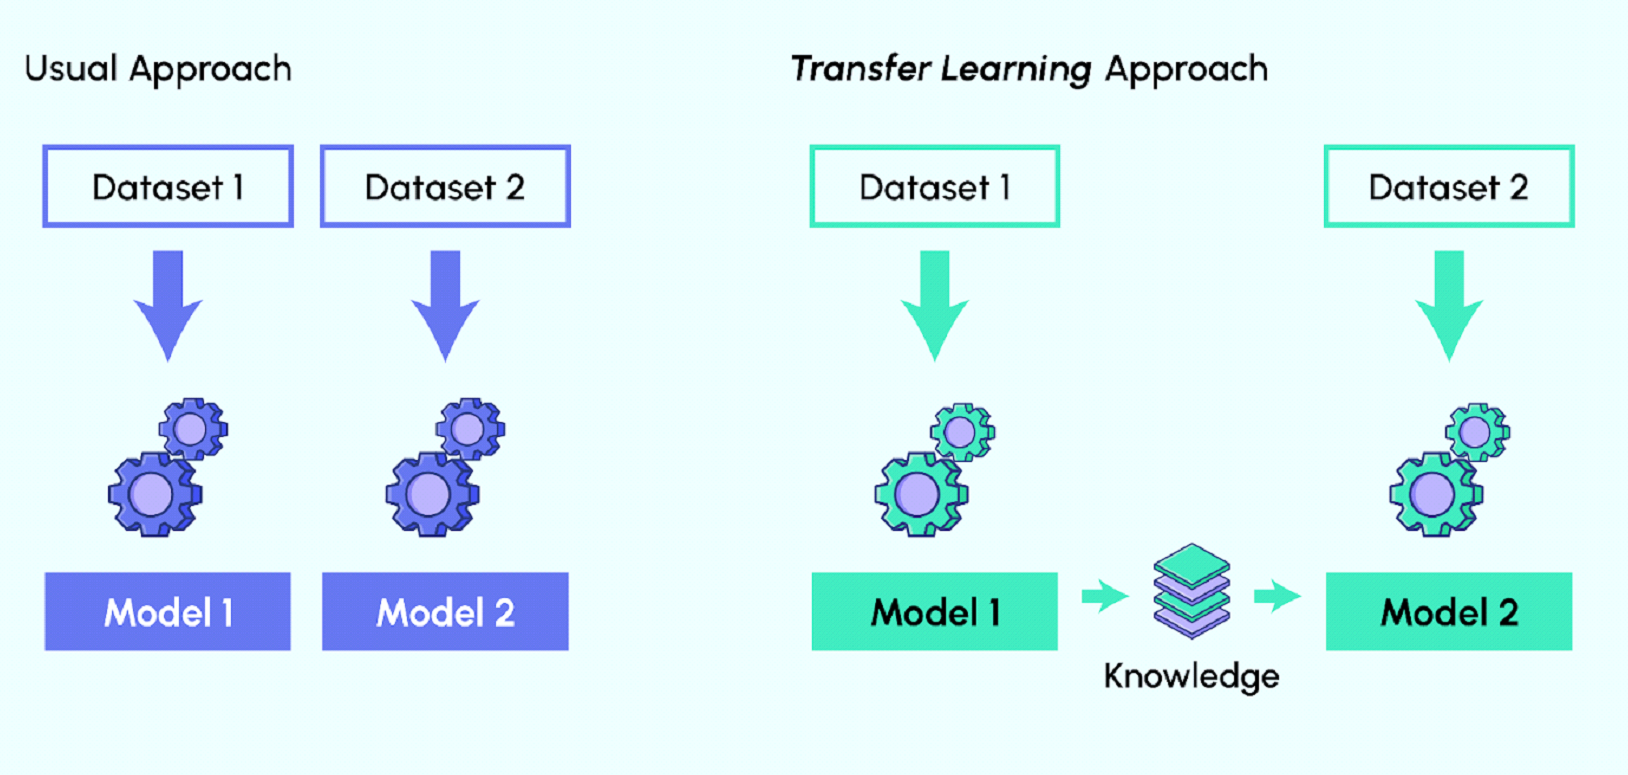 Usual Machine Learning Approach vs Transfer Learning